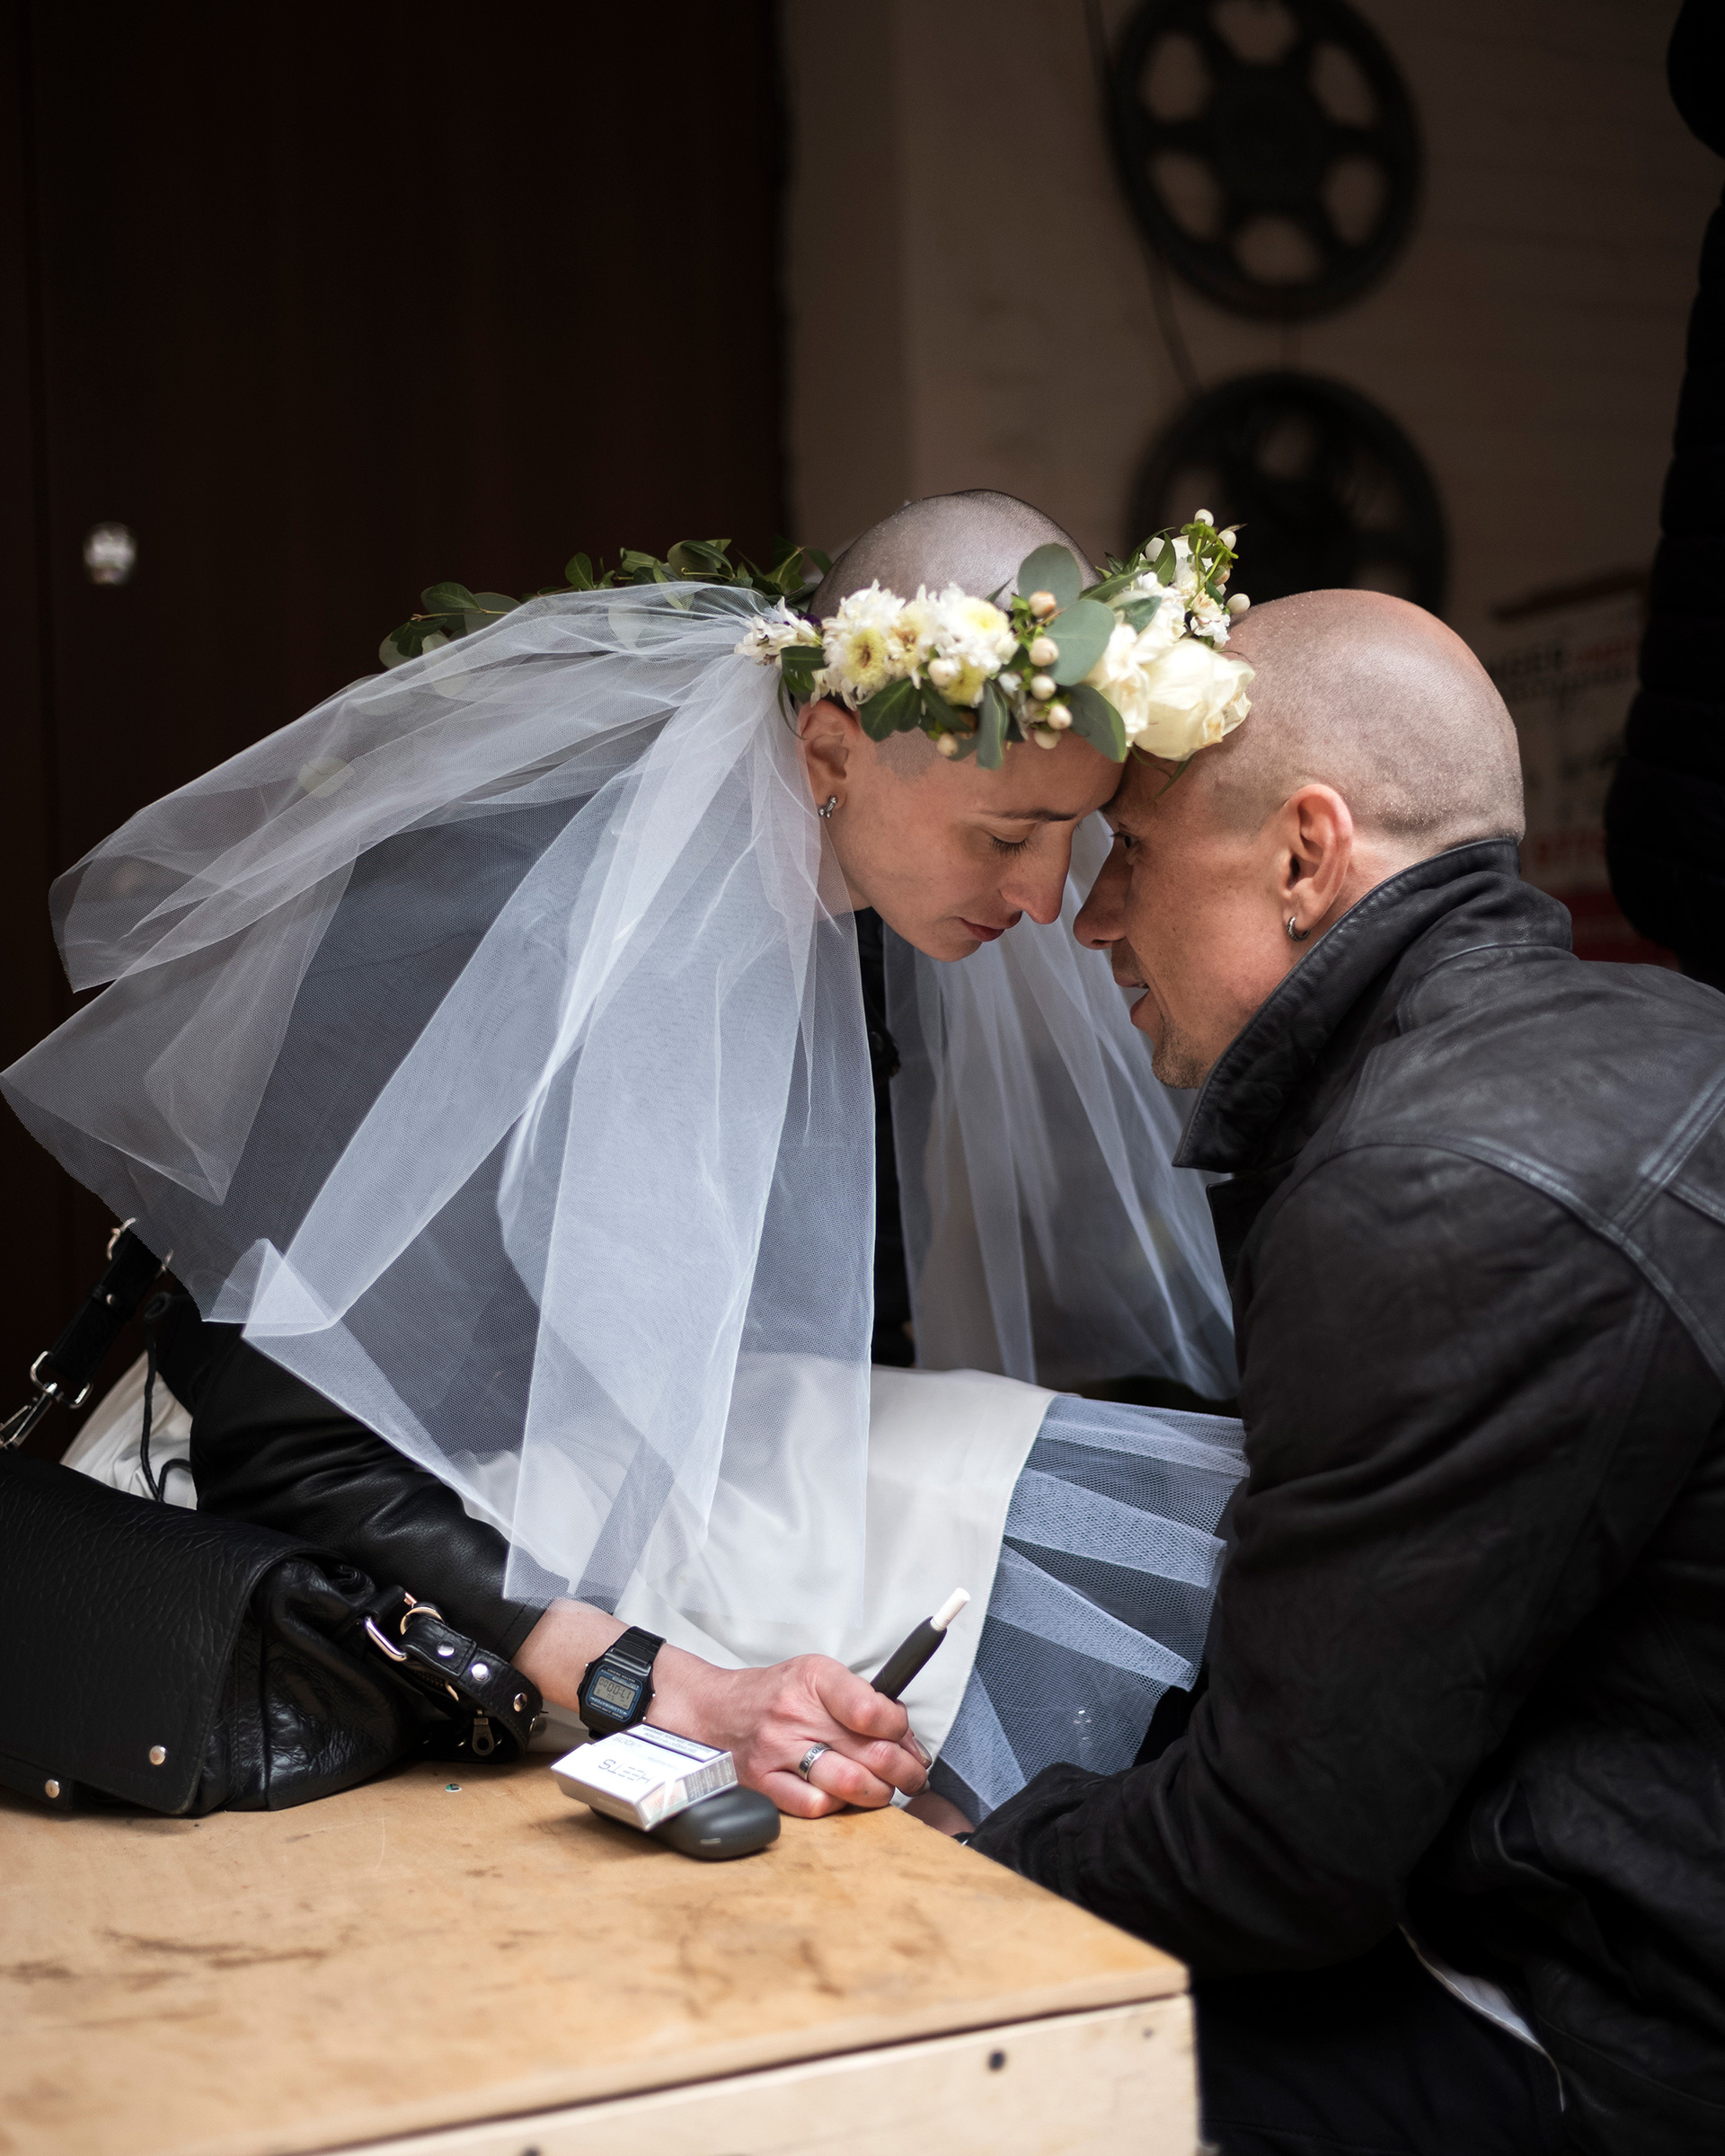 Volunteer doctors Anastsia Hraczow and Anton Sokolow marry in Kharkiv, Ukraine on April 3, 2022. During the reception, Ukrainian poet Serhiy Zhadan described the couple as "strong and brave young people whose love resist the dark reality around." (Agata Grzybowska)